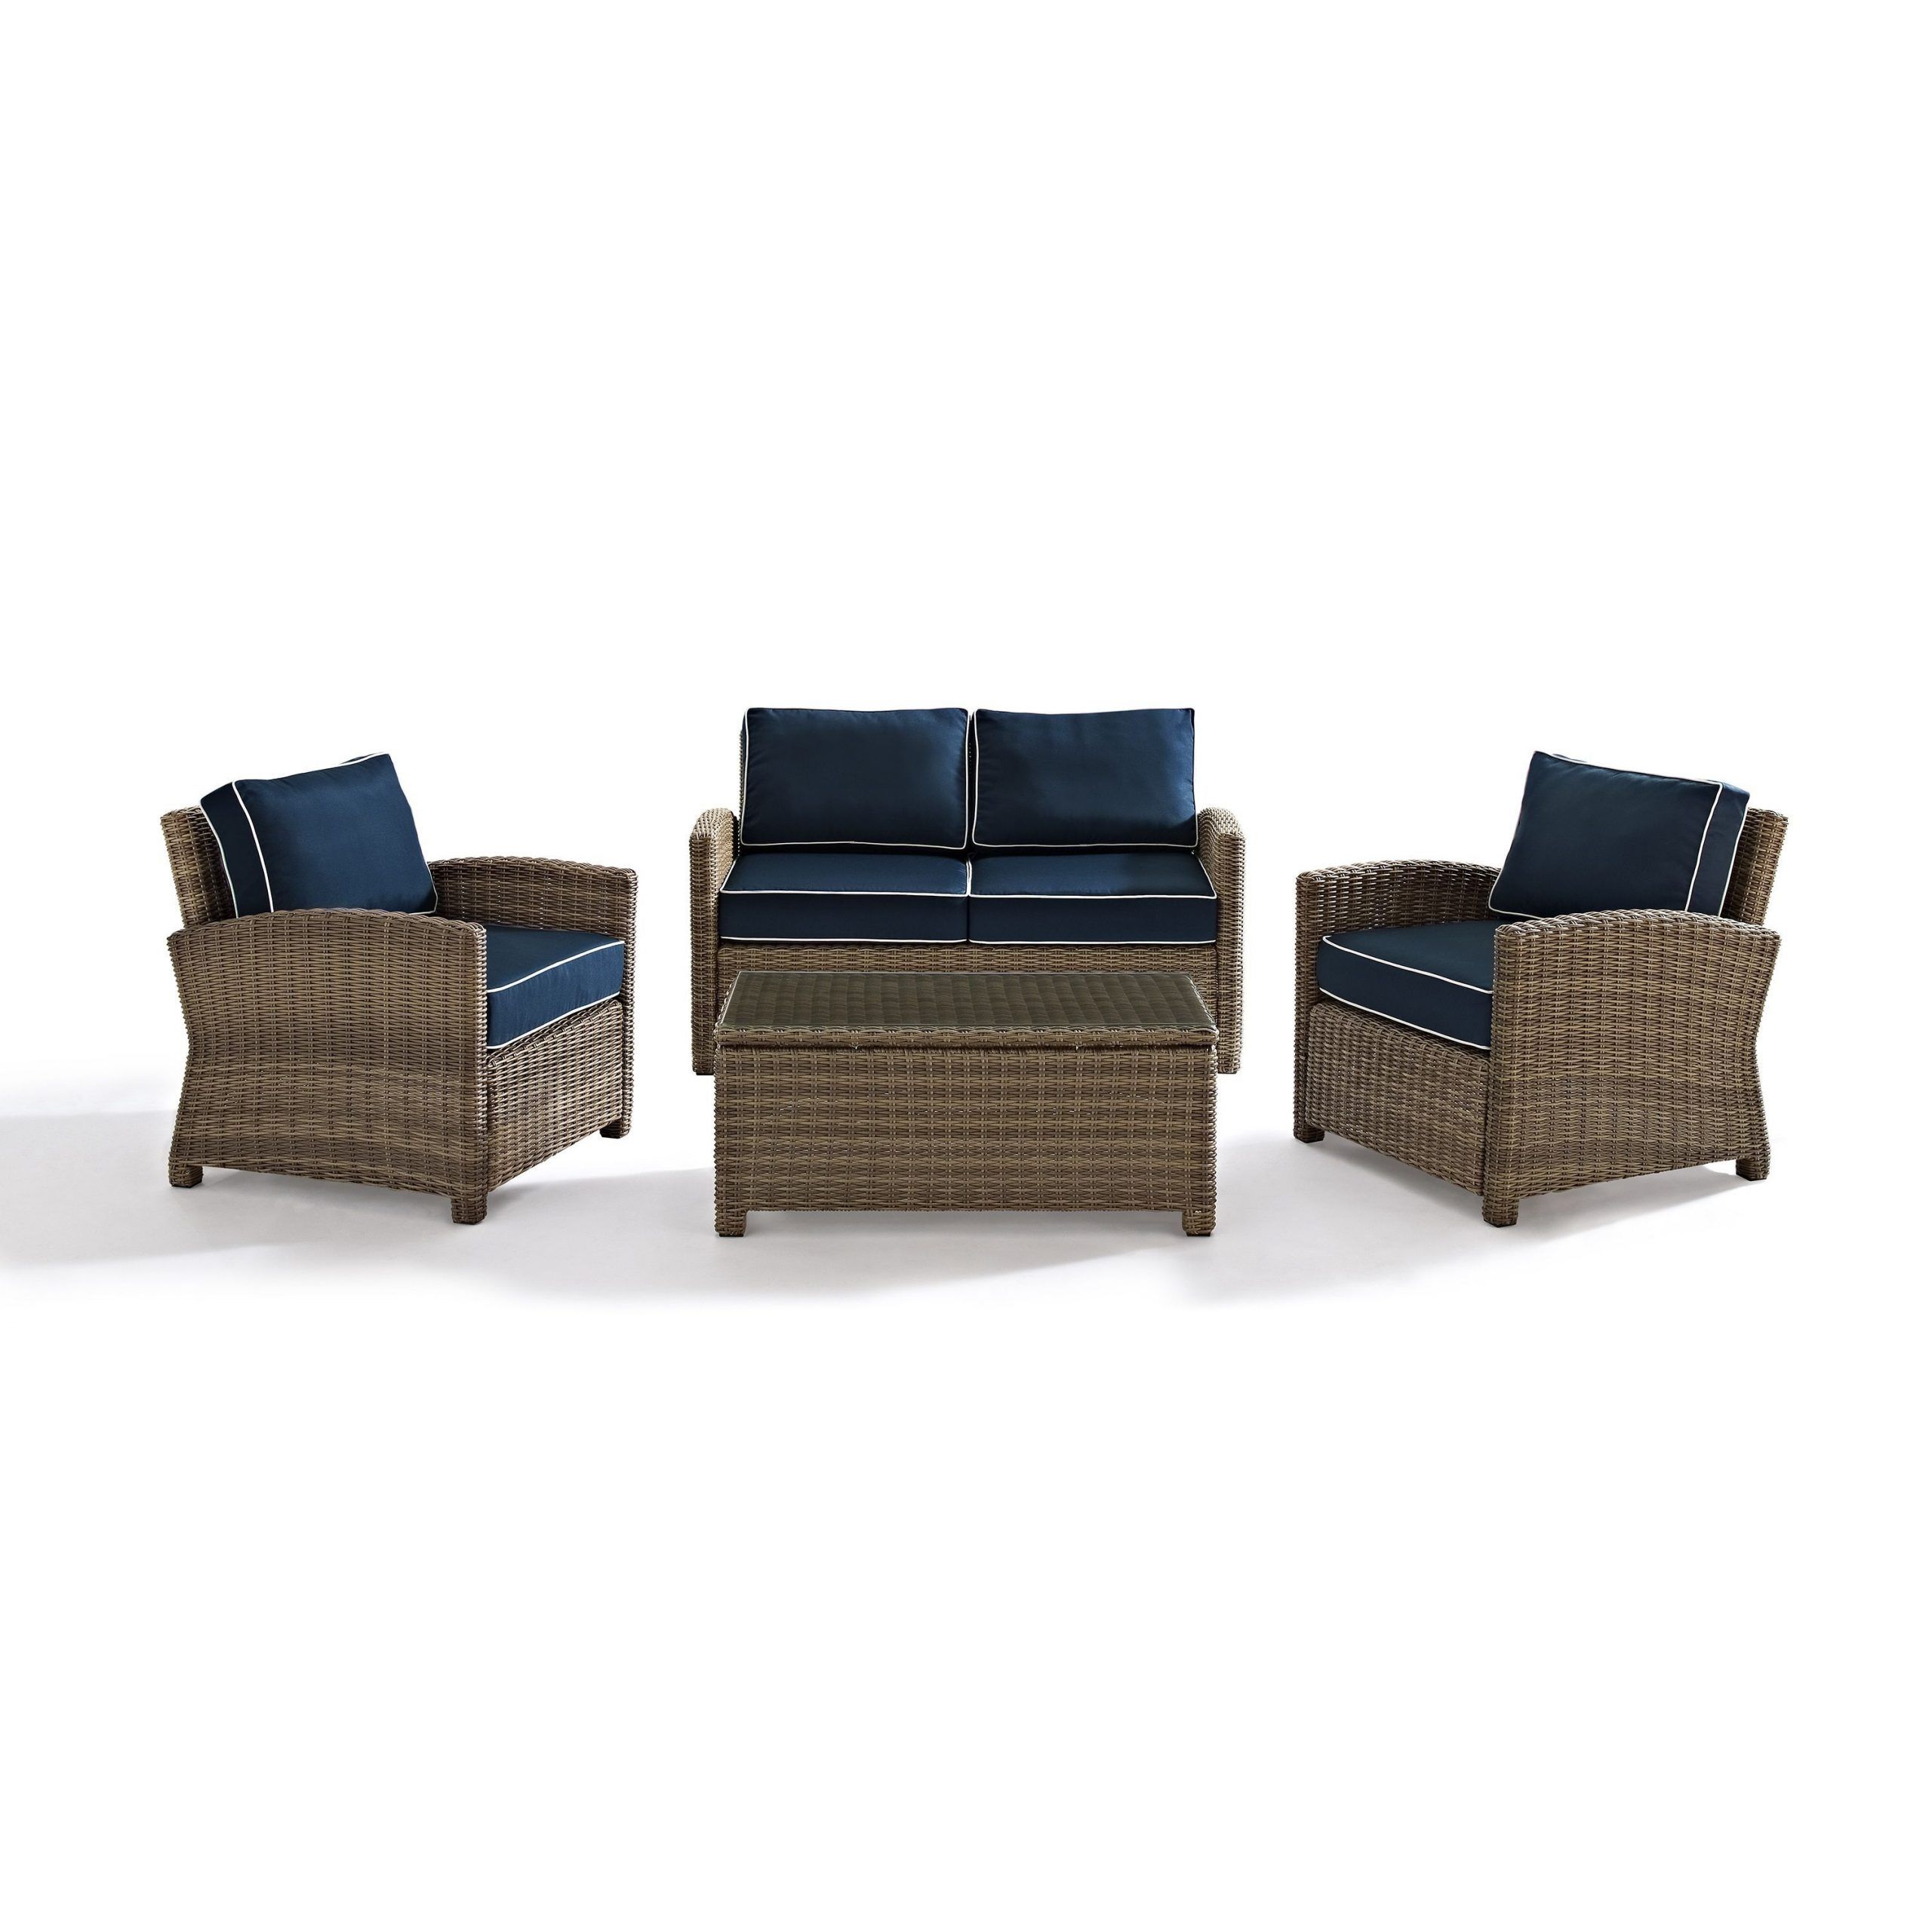 Navy Outdoor Seating Sectional Patio Sets Intended For Popular Bradenton Outdoor Wicker 4 Piece Seating Set With Navy Cushions (brown (View 6 of 15)